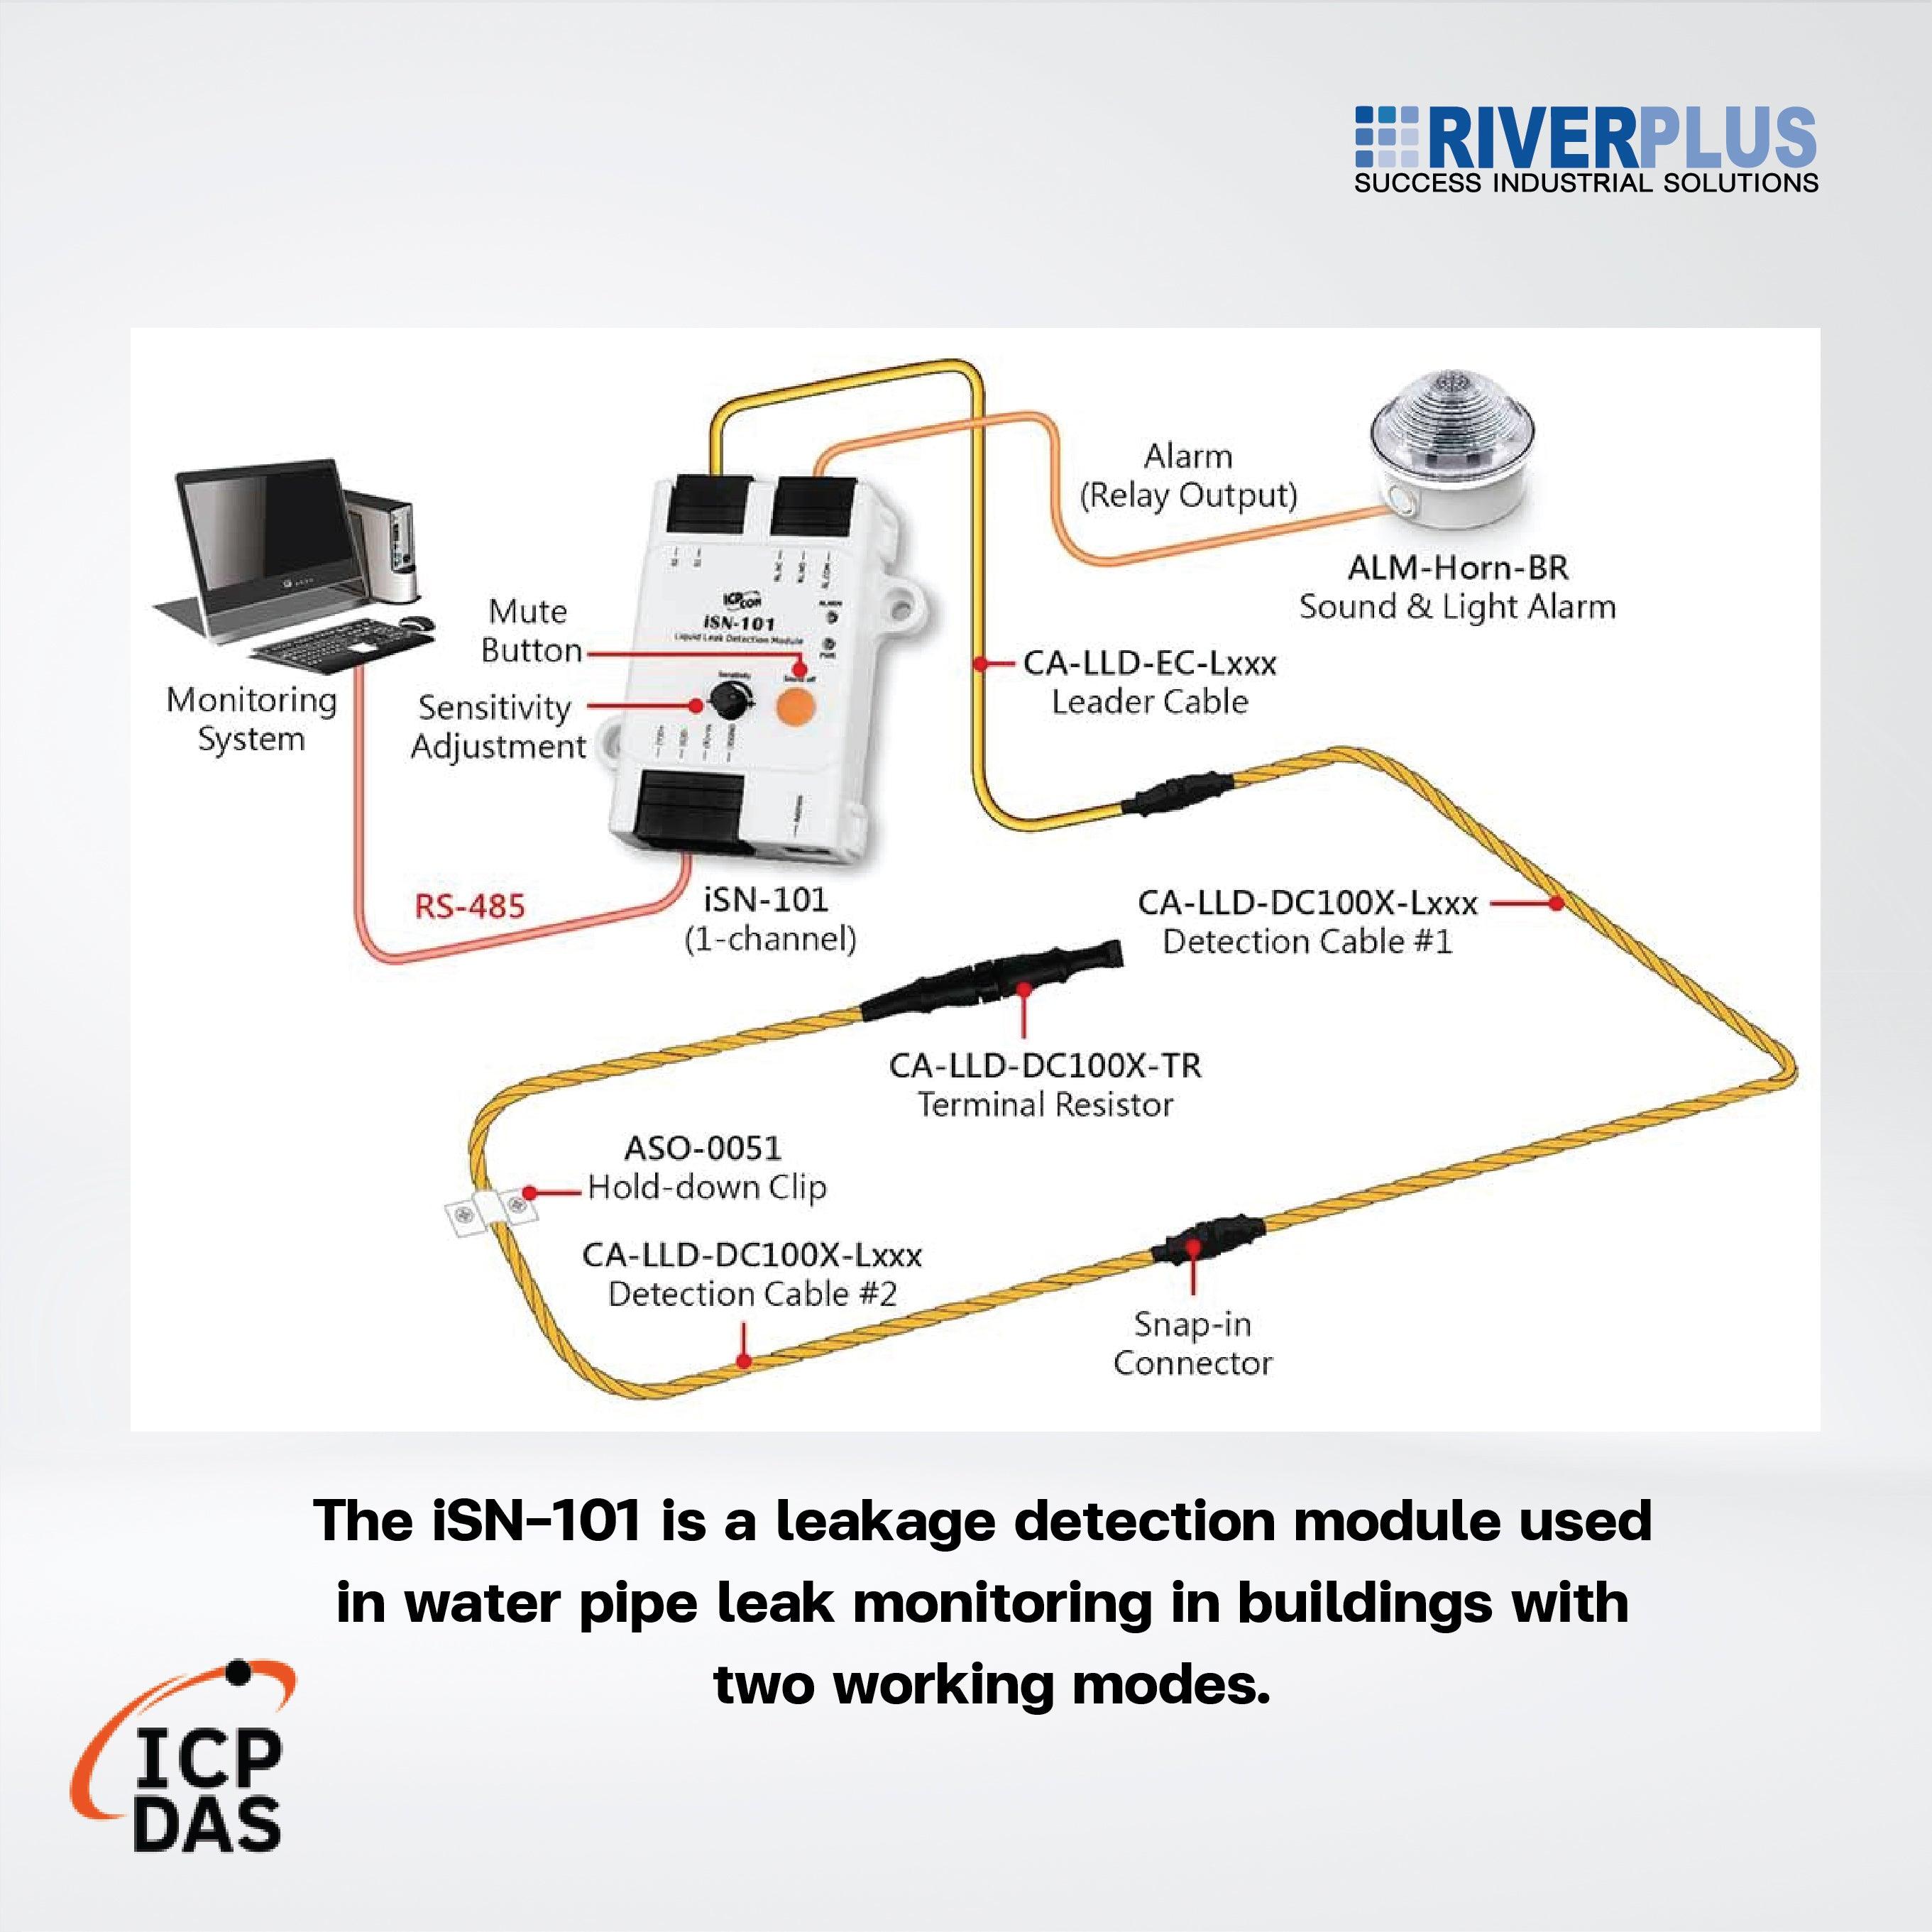 iSN-101/S 1-channel Liquid Leak Detection Module with cables - Riverplus